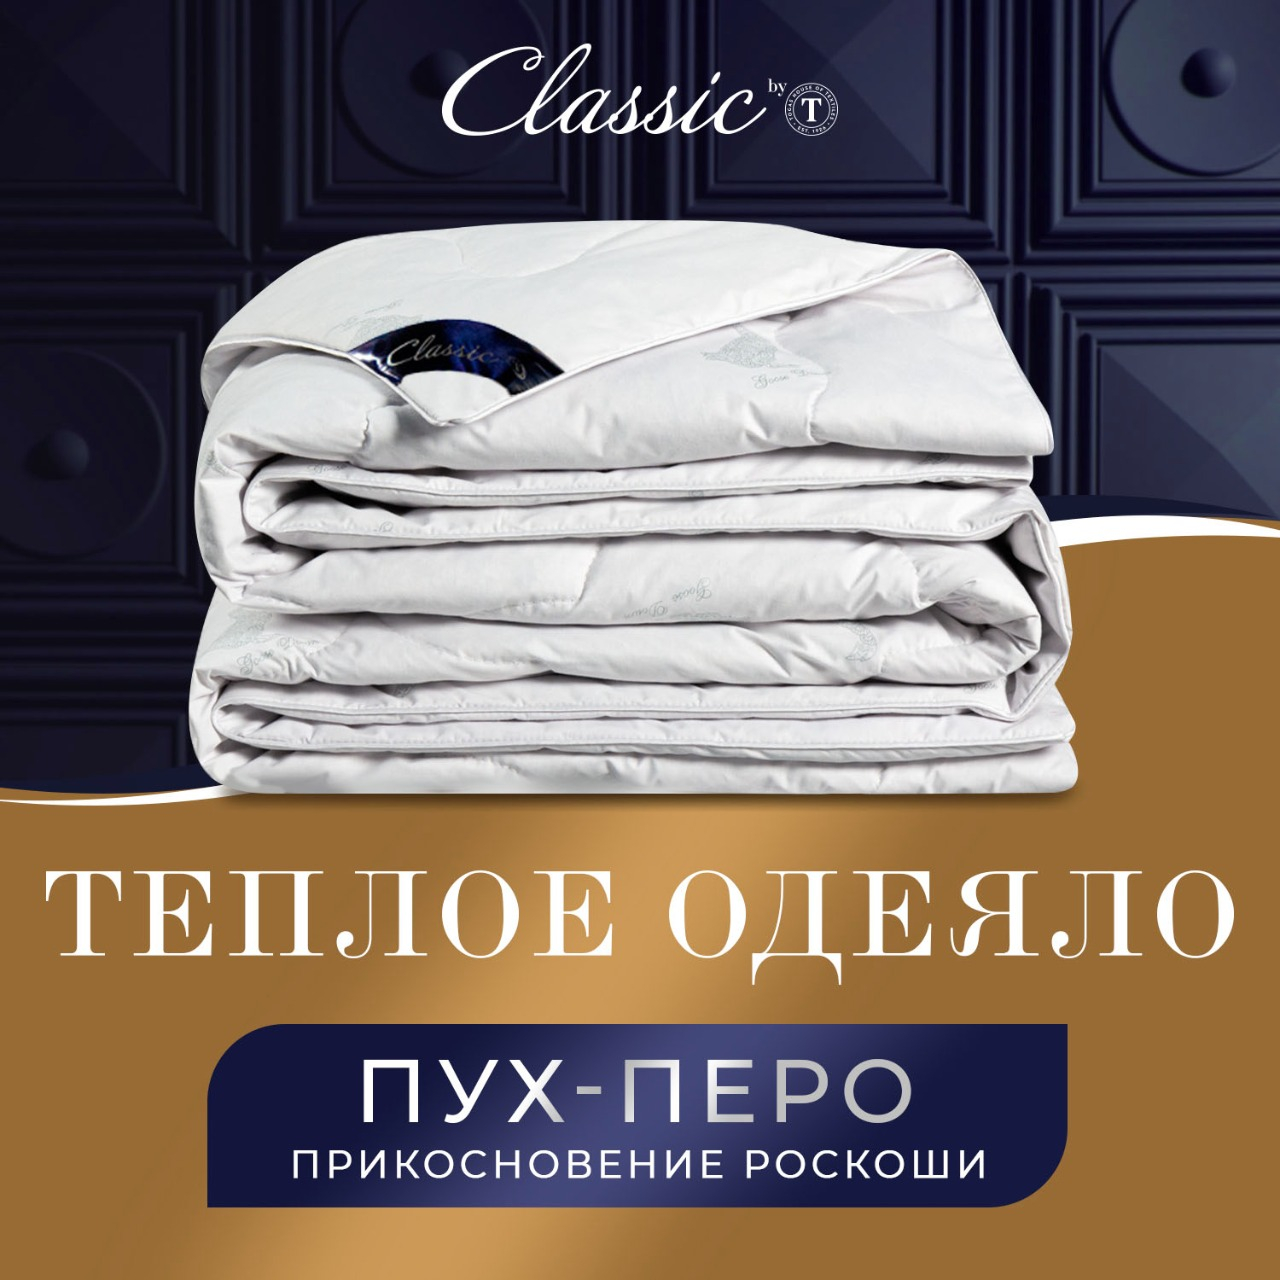 Одеяла CLASSIC by T